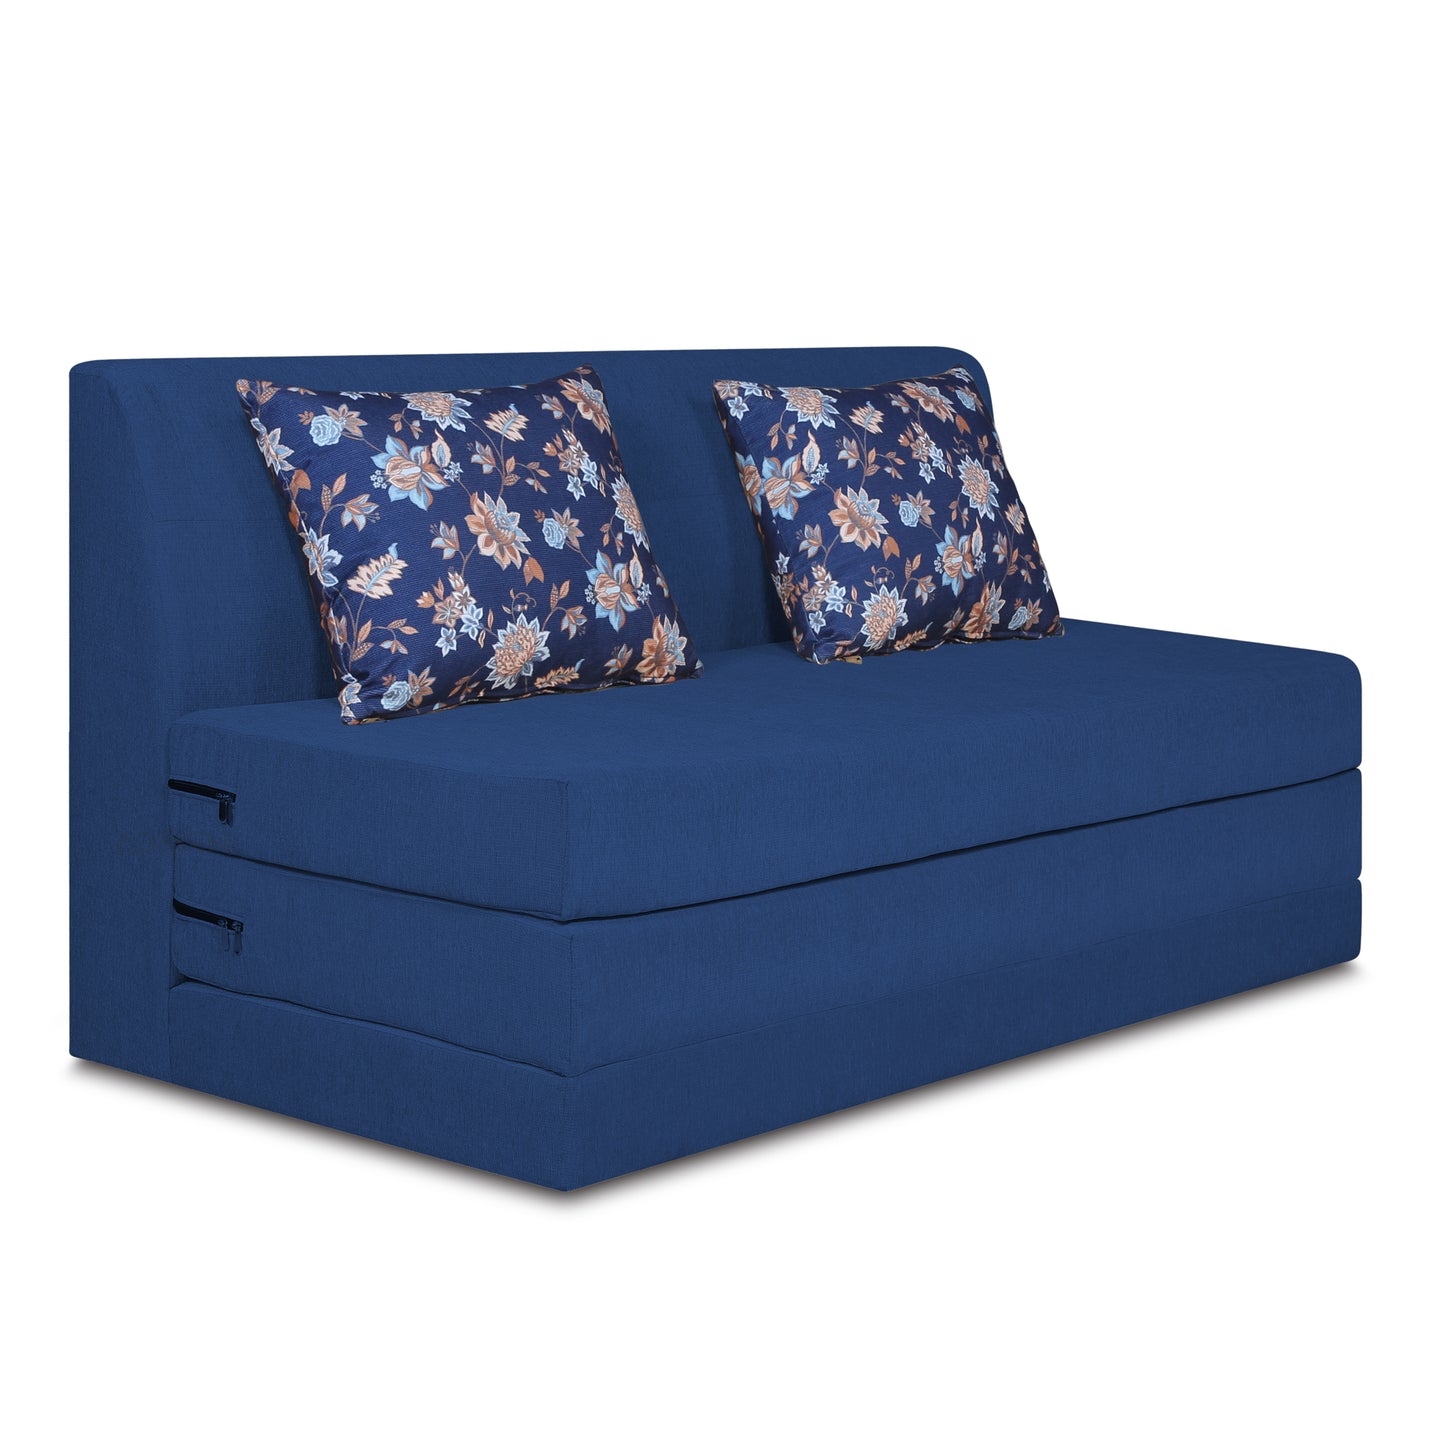 Adorn India Easy Highback Two Seater Sofa Cum Bed Floral 4' x 6' (Blue)